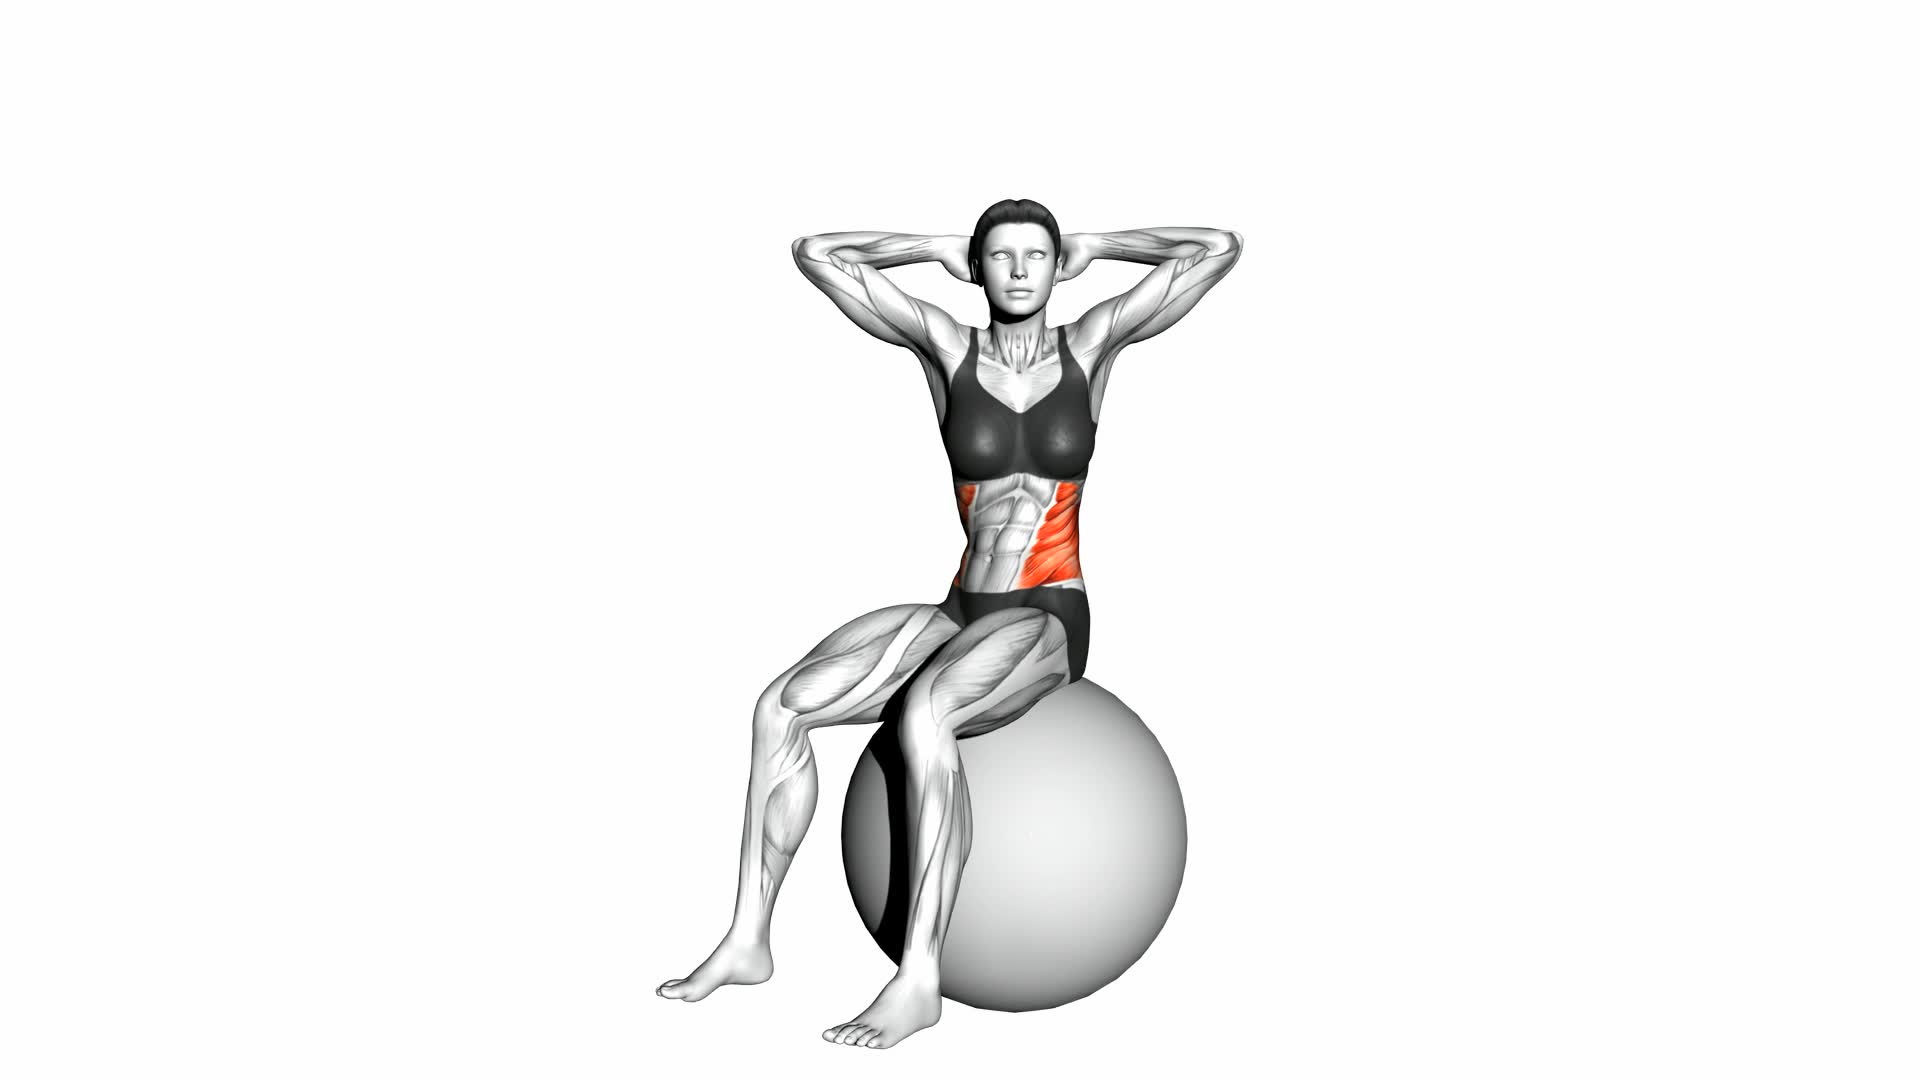 Seated Twist (On Stability Ball) - Video Exercise Guide & Tips